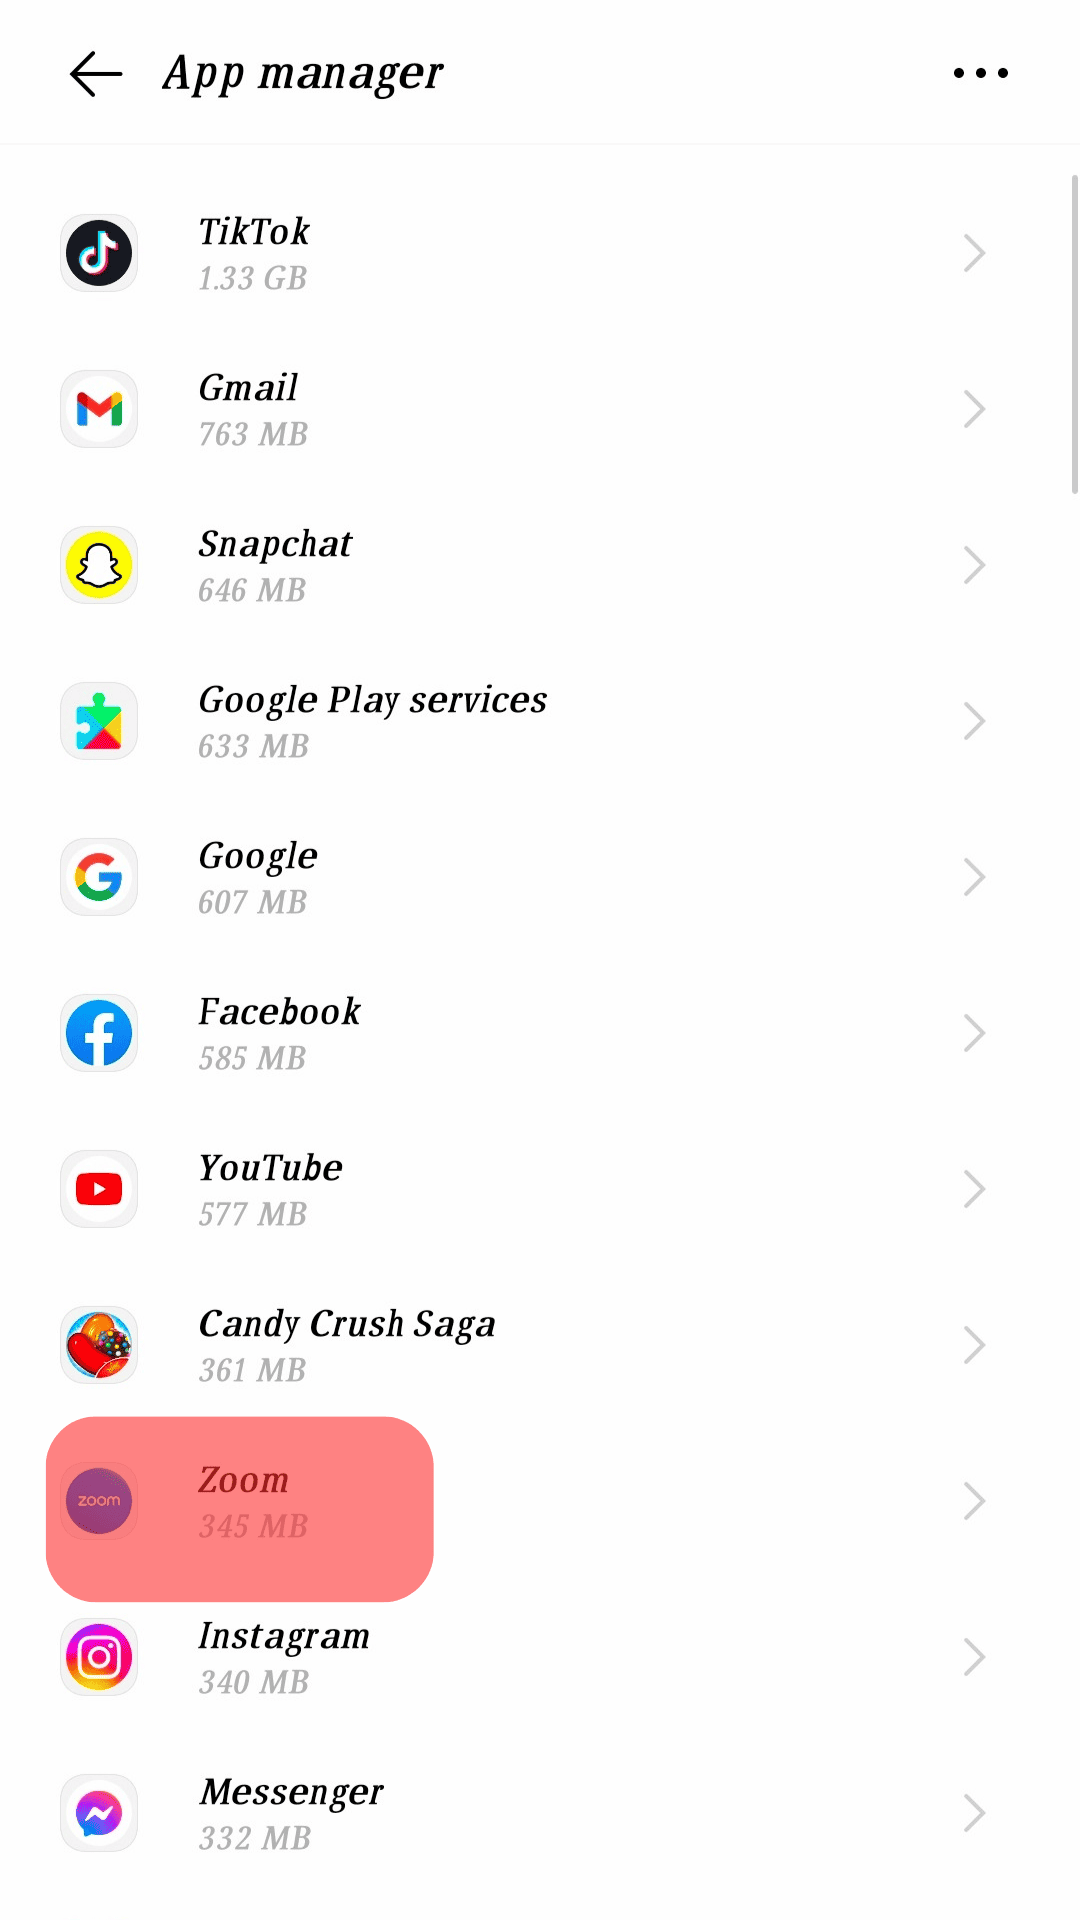 Locate Zoom Under Mobile Apps